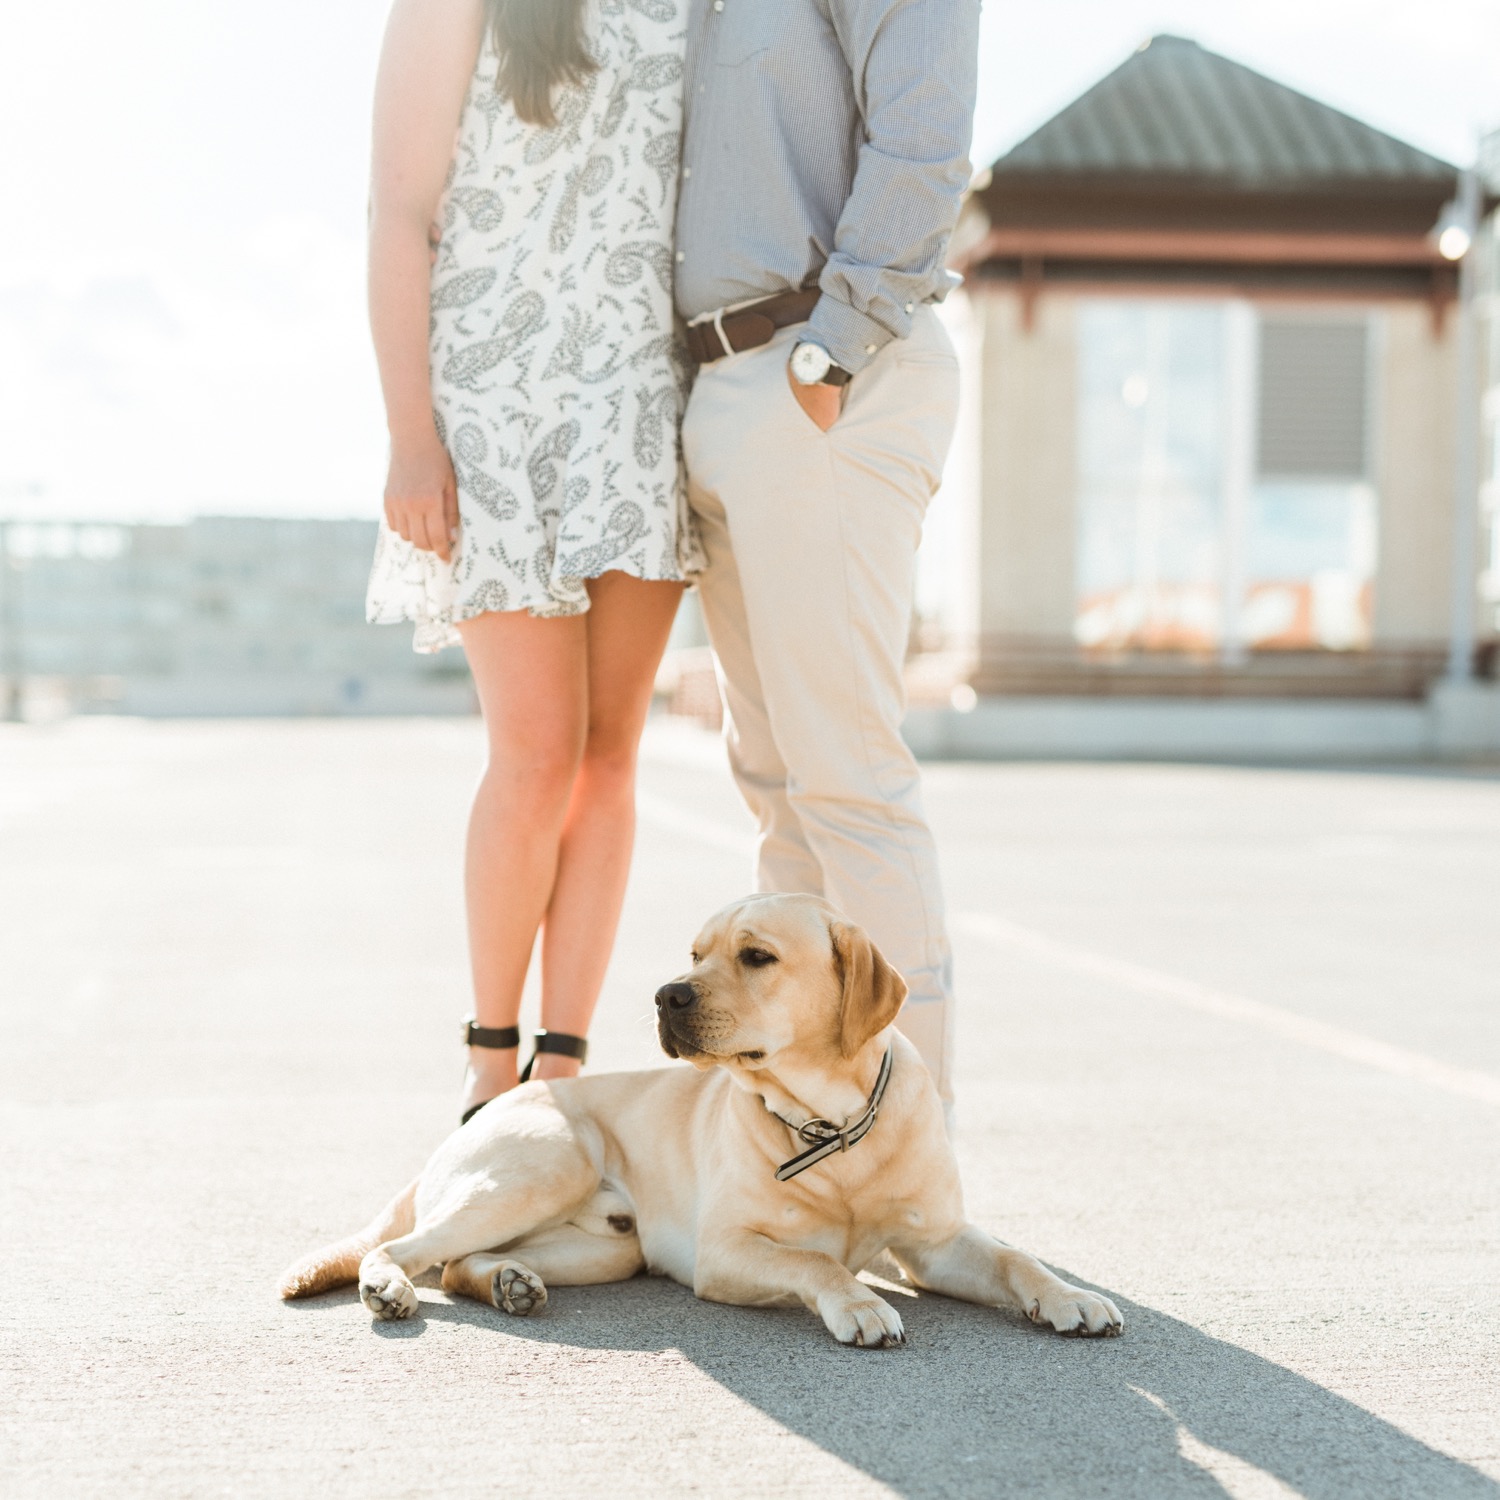 engaged couple kissing while dog sits at their feet and looks away from the camera